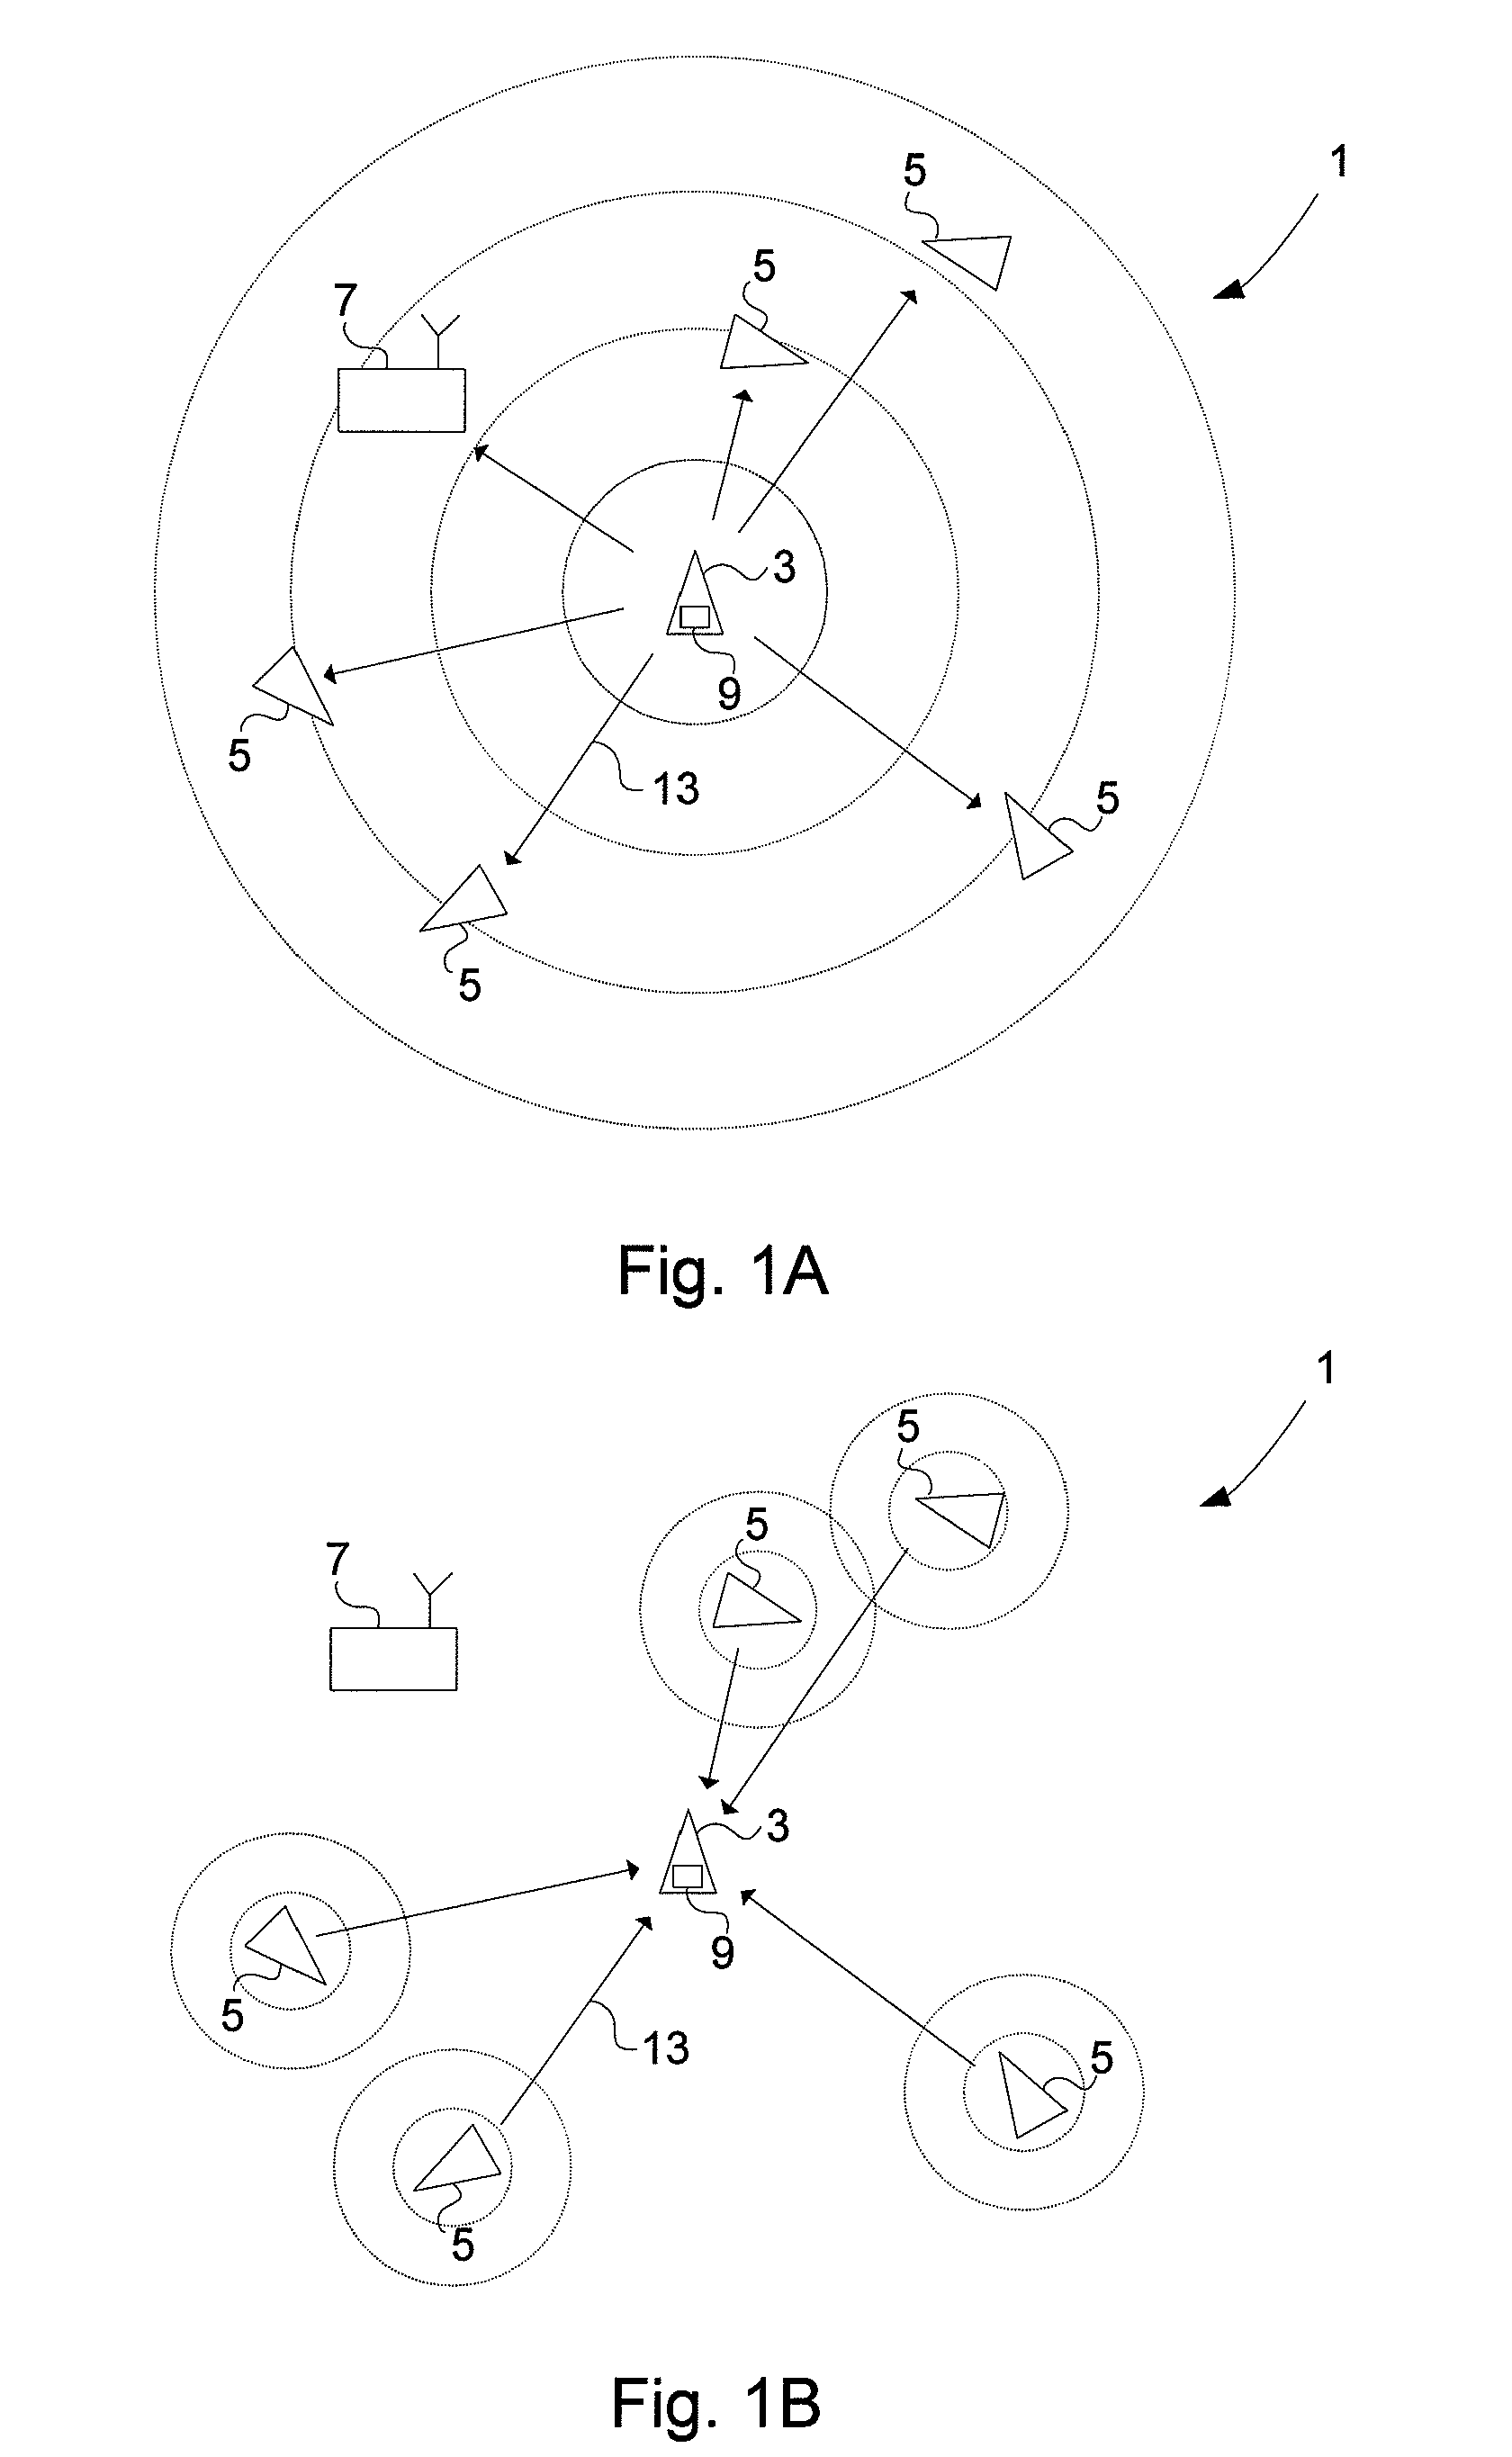 Validity check of vehicle position information transmitted over a time-synchronized data link